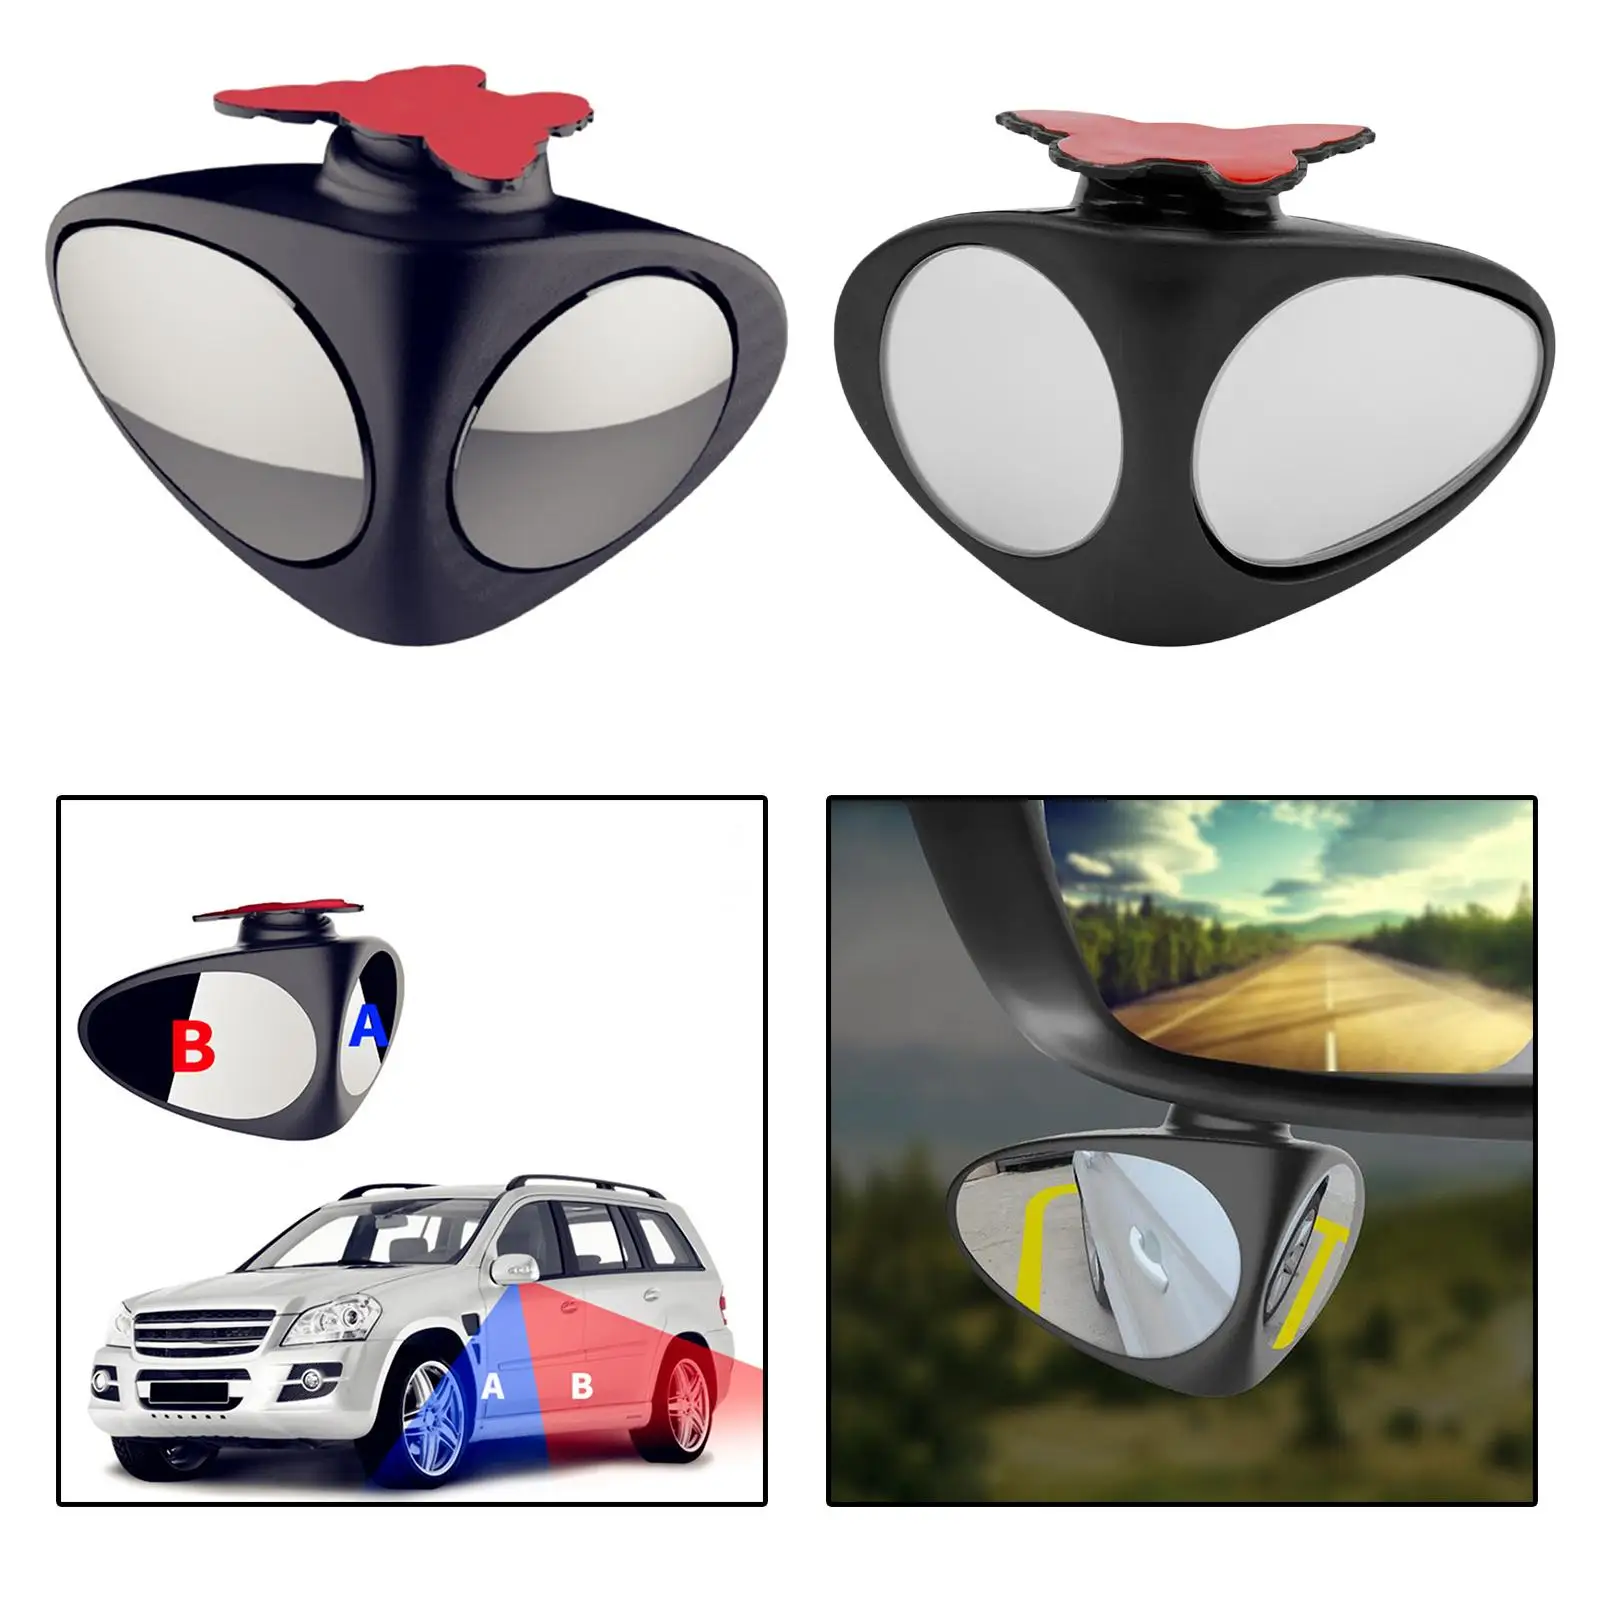 Automibile 360 Degree Rotatable 2 Side Car Blind Spot Convex Mirror Car Exterior Rear View Parking Mirror